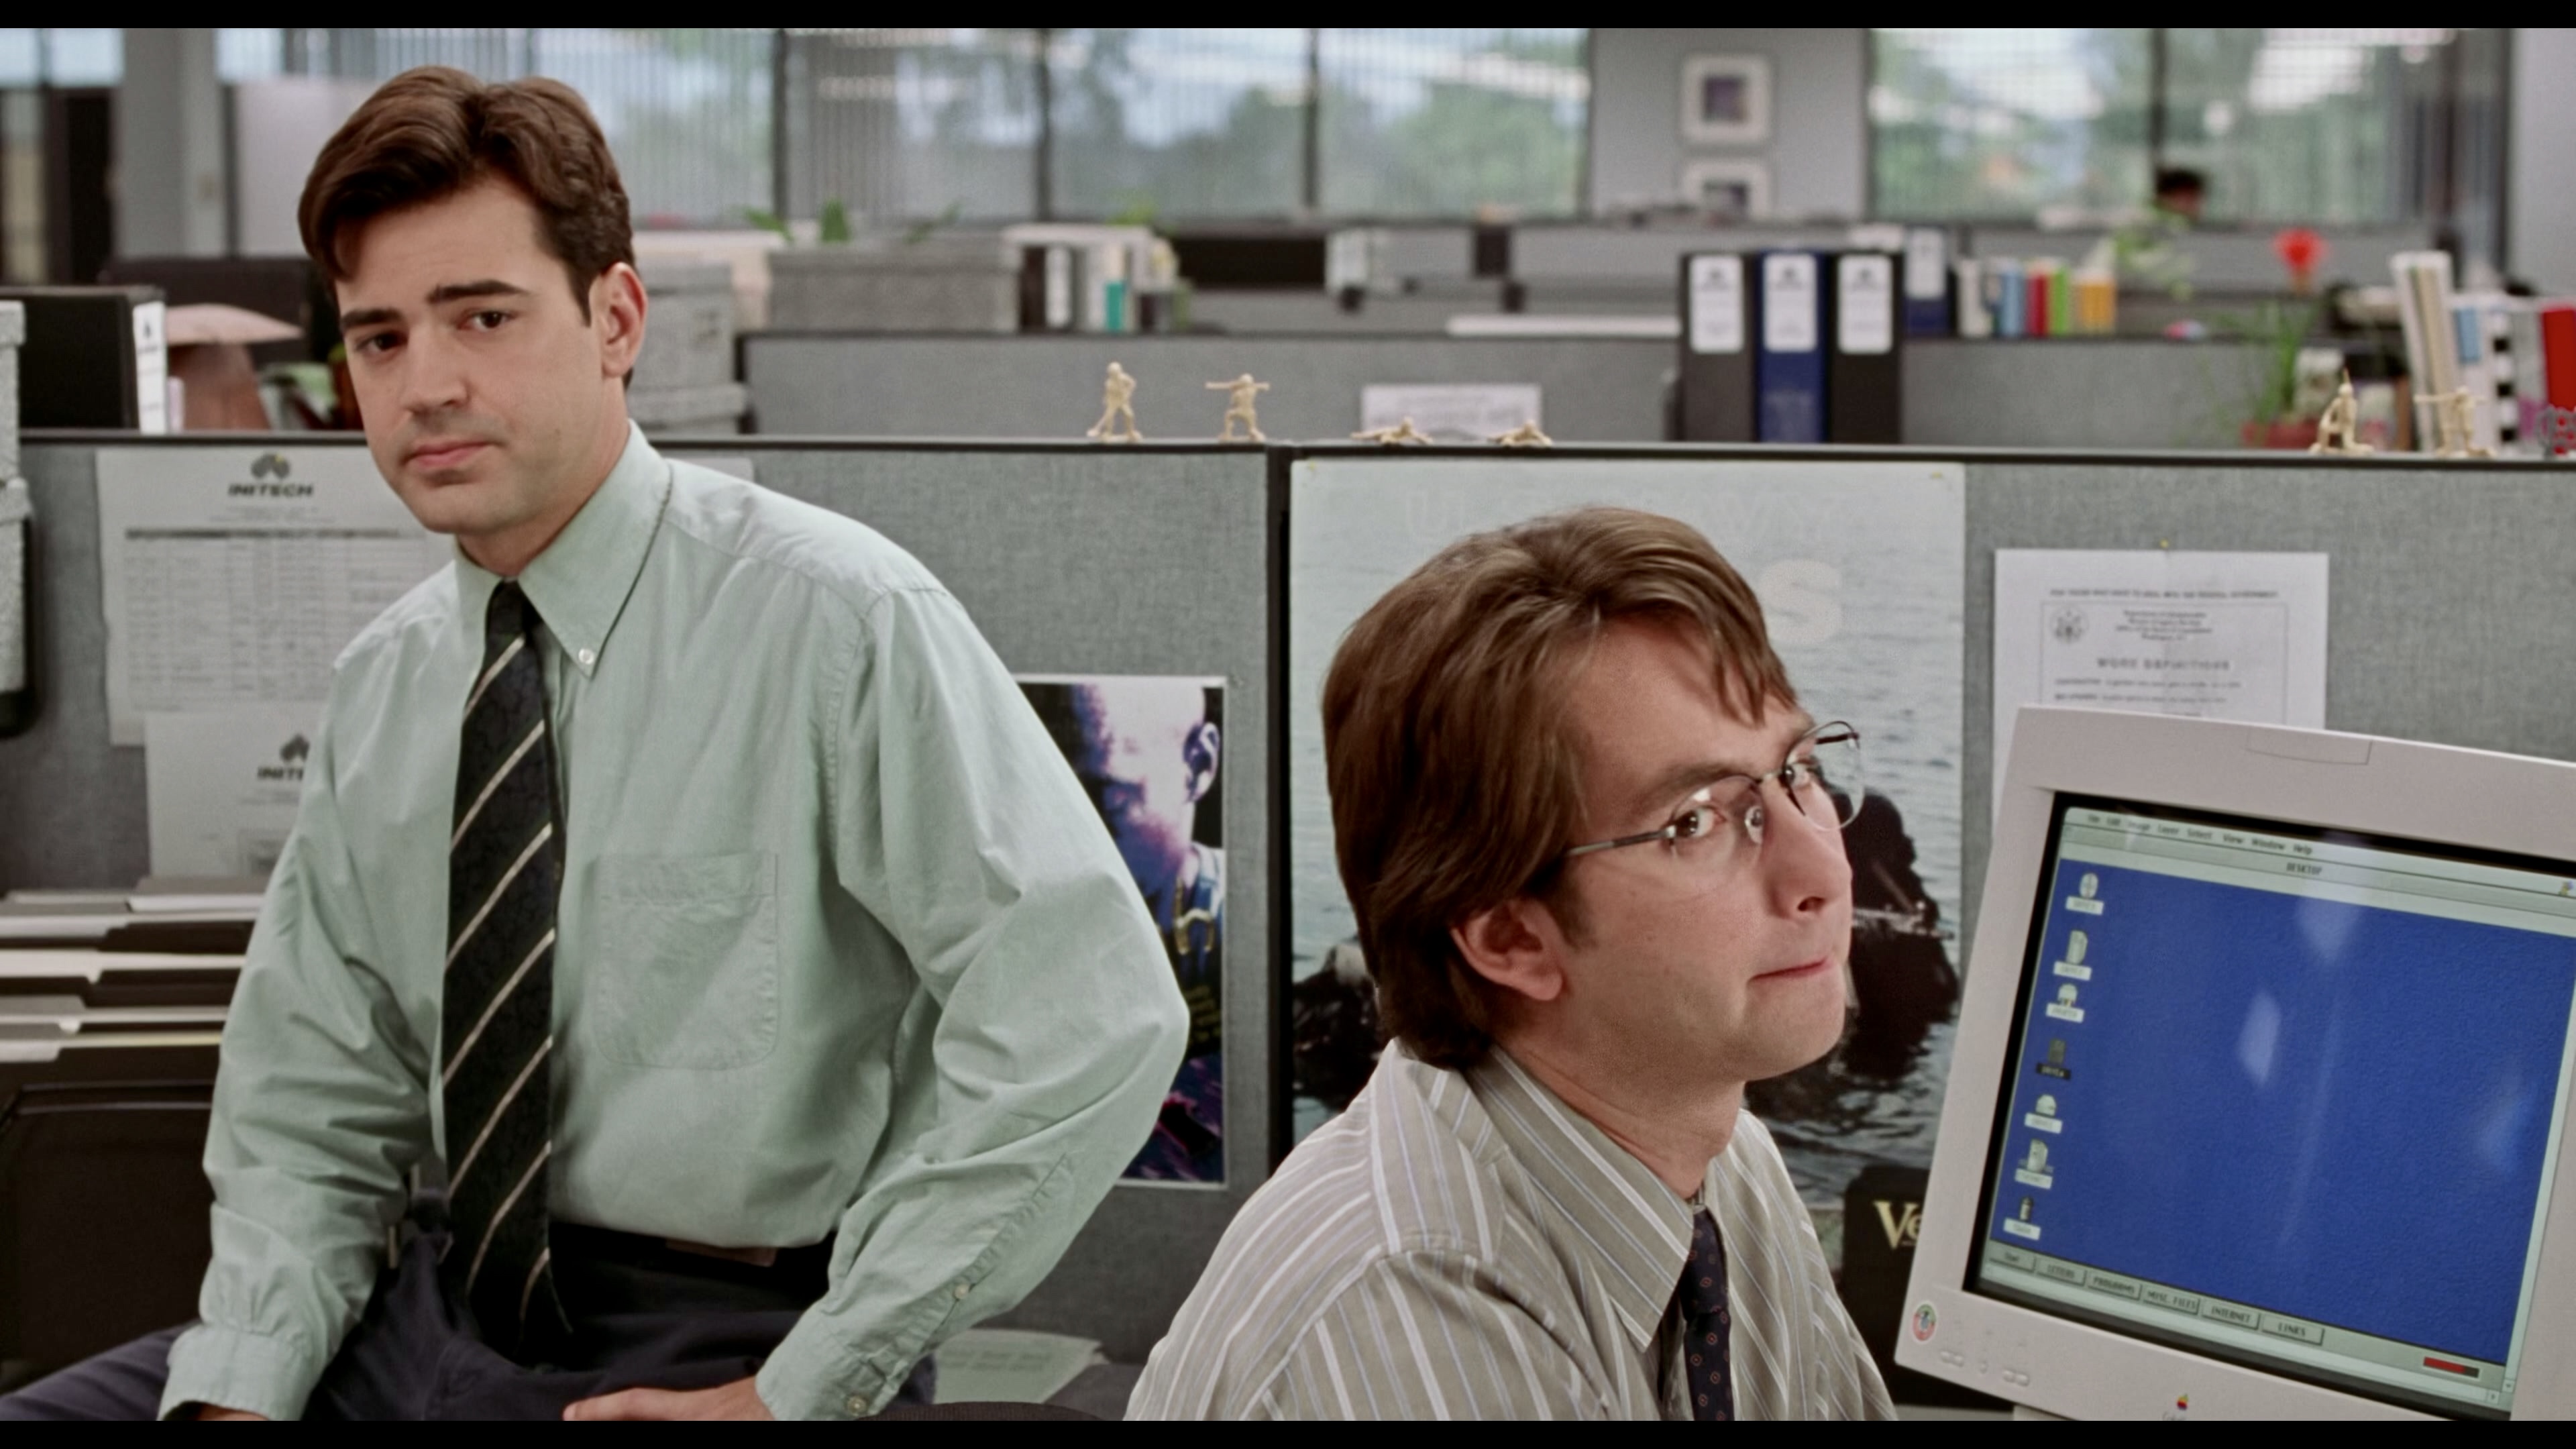 <p><em>Office Space</em>, directed by Mike Judge, embarked on a fascinating journey from a cult classic to a film that has infiltrated mainstream culture while profoundly influencing modern cinema. When it was released in 1999, it was met with mixed success at the box office but quickly found a dedicated cult following. Its scathing critique of the corporate world, combined with its deadpan humor and relatable characters, resonated with audiences on multiple levels.</p>  <p>Over time, the film's anti-capitalist underpinnings and wry humor have become increasingly relevant in an era marked by office culture and the dehumanizing effects of modern work environments.<em> Office Space</em> stands as a biting satire that informed a new wave of workplace comedies and influenced TV series like <em>The Office</em> and <em>Parks and Recreation</em>. Its memorable scenes, such as the printer-smashing "TPS reports" moment, have become iconic, and its enduring impact on modern cinema continues to remind us that even in the mundane, there's room for insightful and hilarious storytelling.</p>